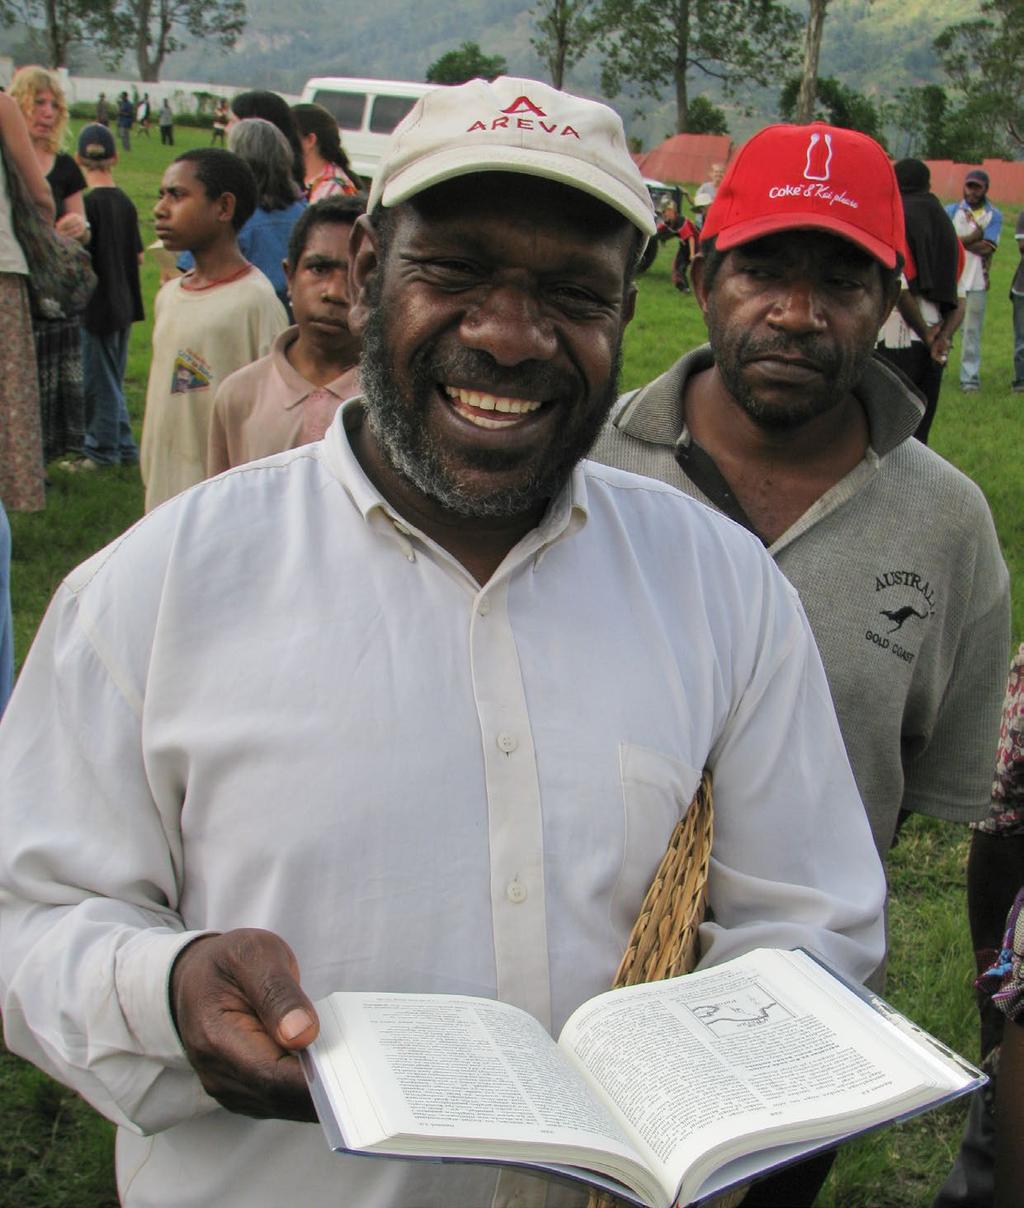 WORLDWIDE PROJECTS FUND SALT AND LIGHT ACROSS PAPUA NEW GUINEA Thanks to your donation to the Worldwide Projects Fund, you ve helped Scripture engagement ministries like Pacific SALT.